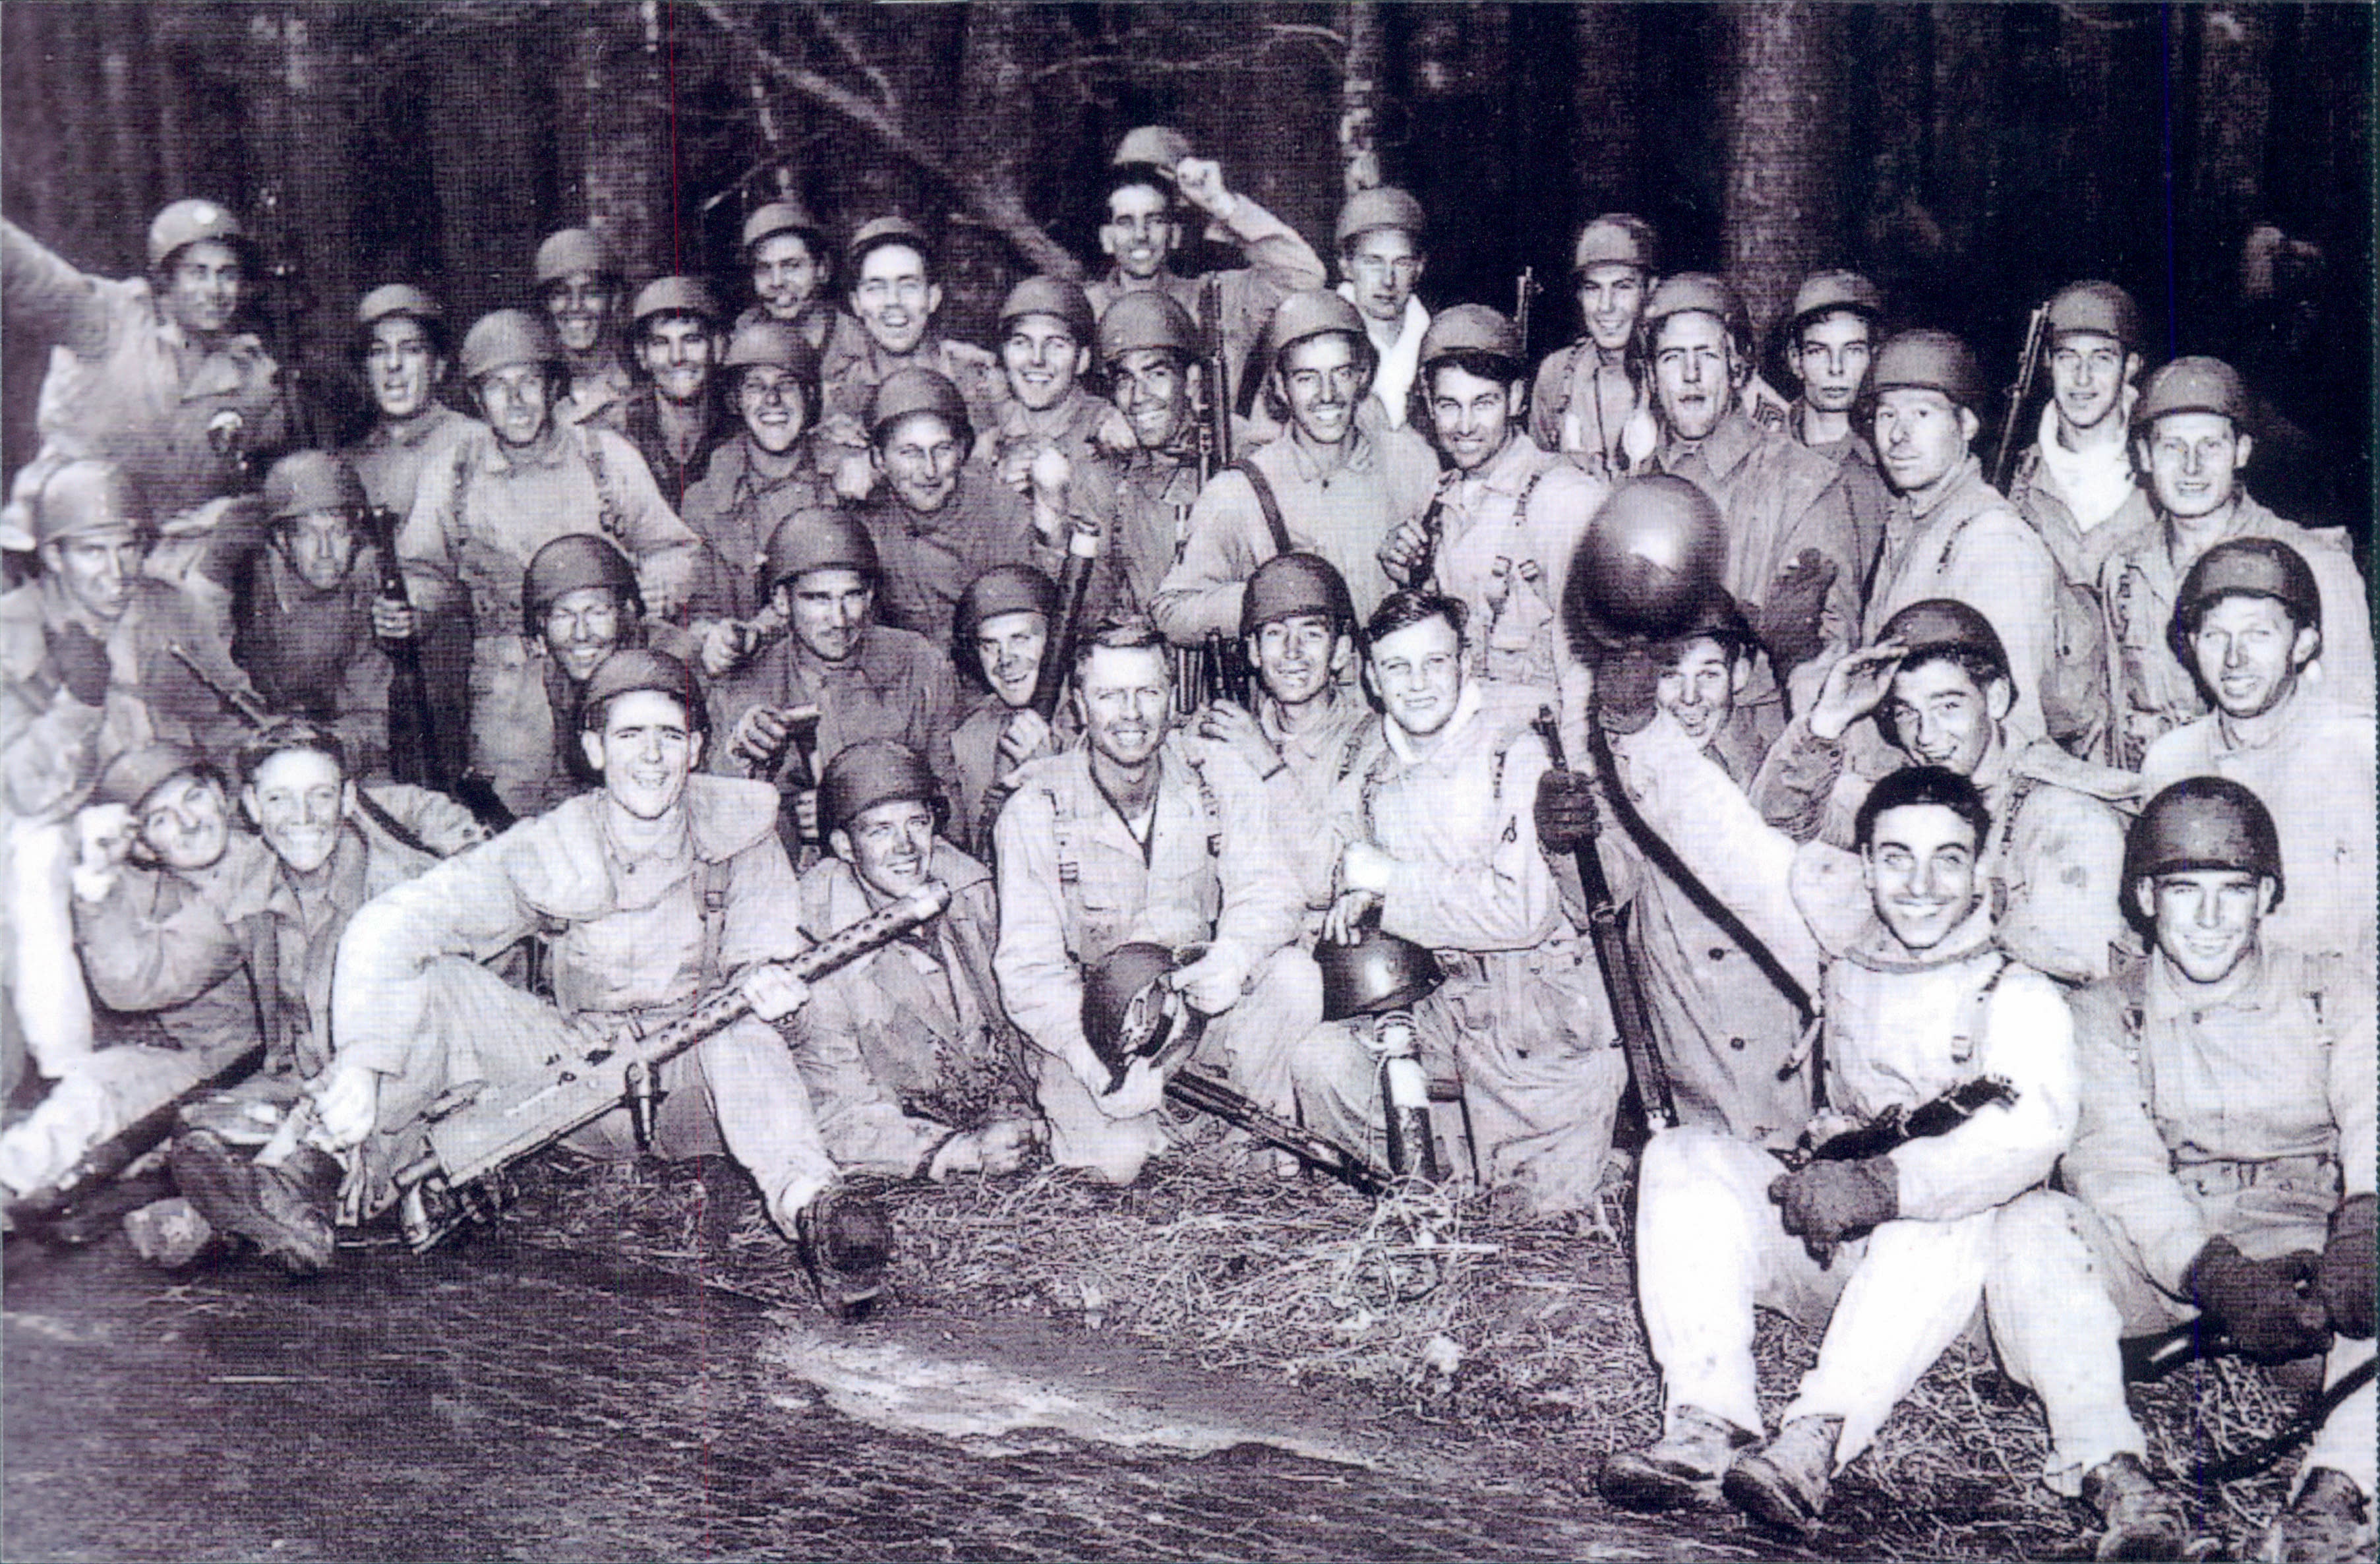 Easy company band of brothers group photo from wwii.